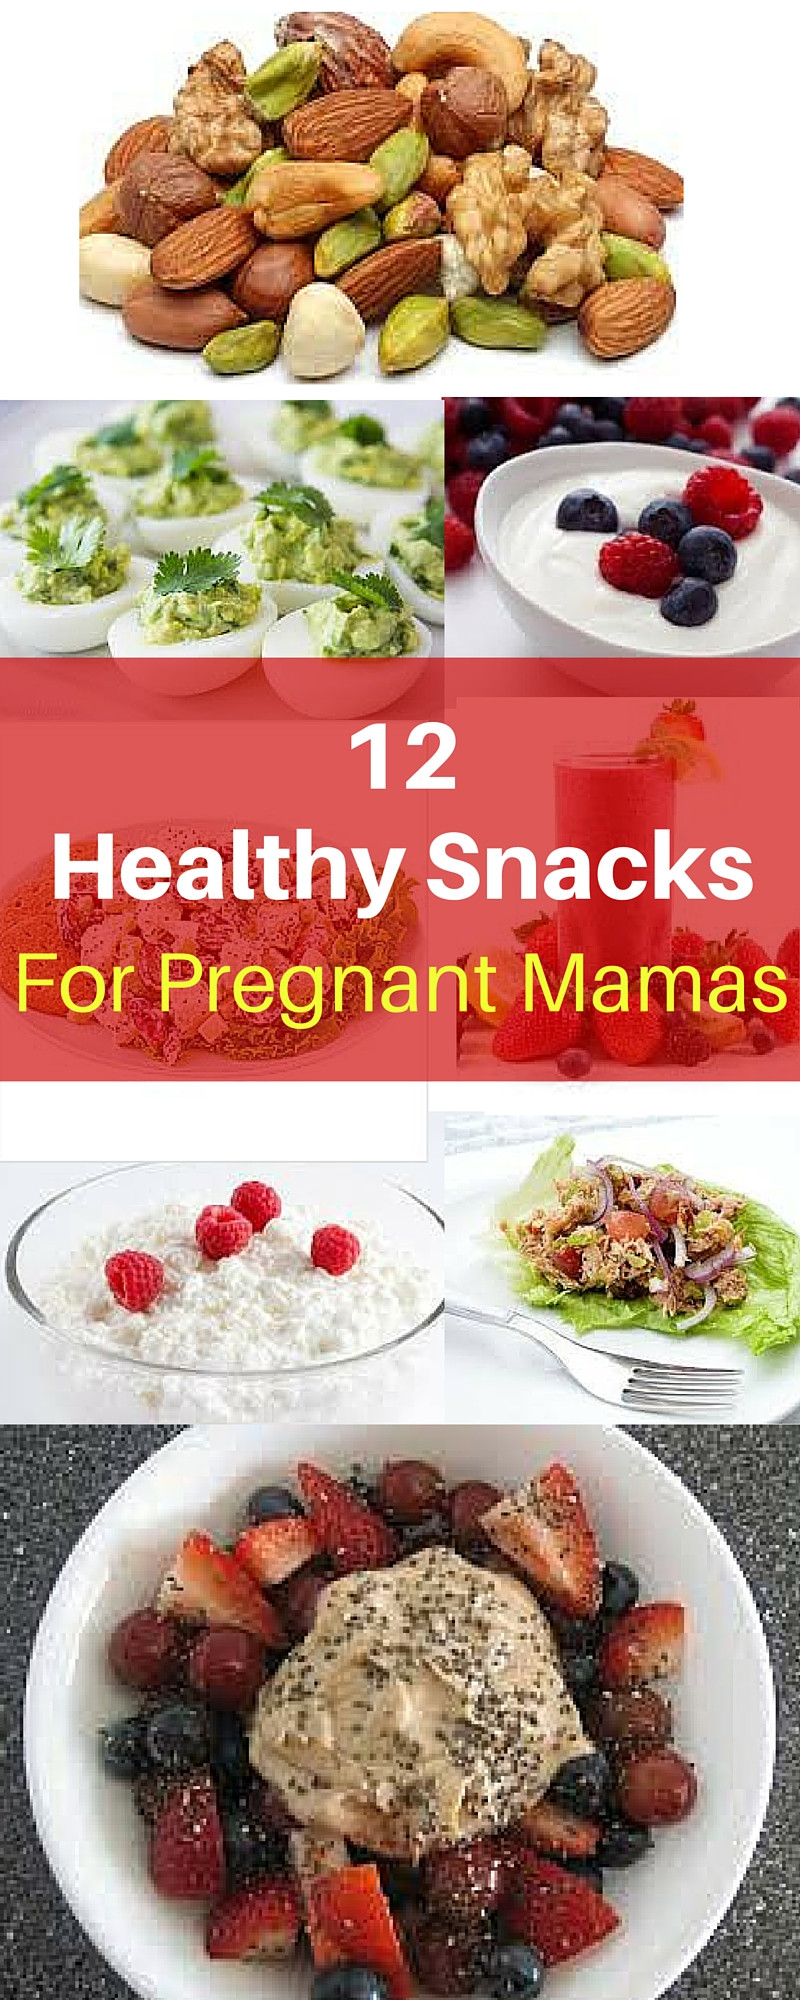 Healthy Pregnancy Snacks
 10 Healthy Snacks For Pregnant Mamas Michelle Marie Fit